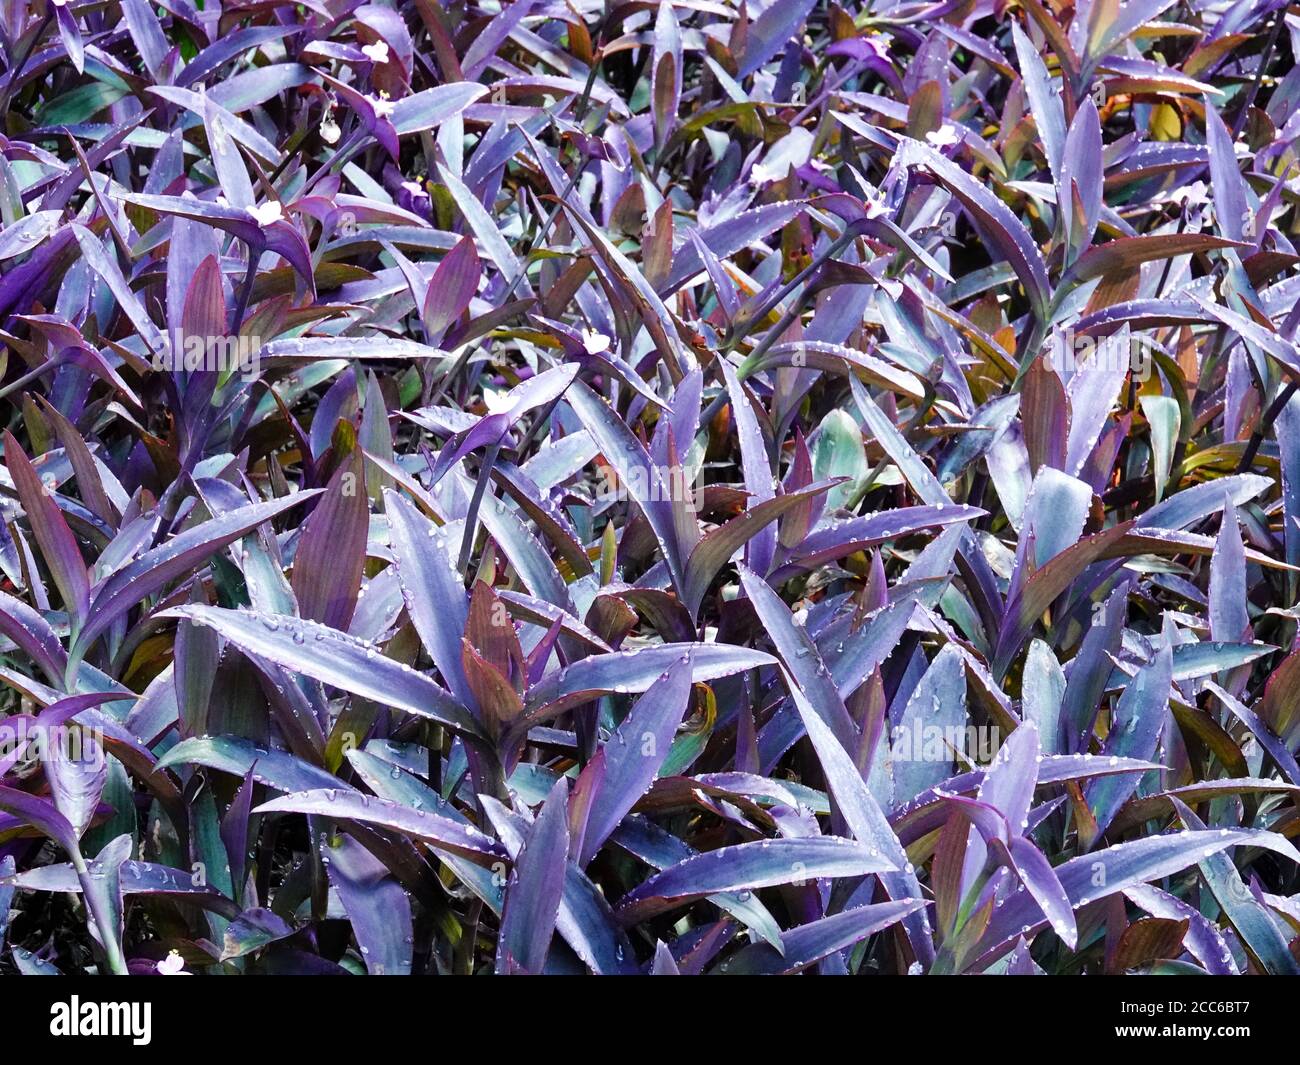 Tradescantia pallida is a species of spiderwort more commonly known as wandering jew or walking jew, North Central Florida, USA. Stock Photo